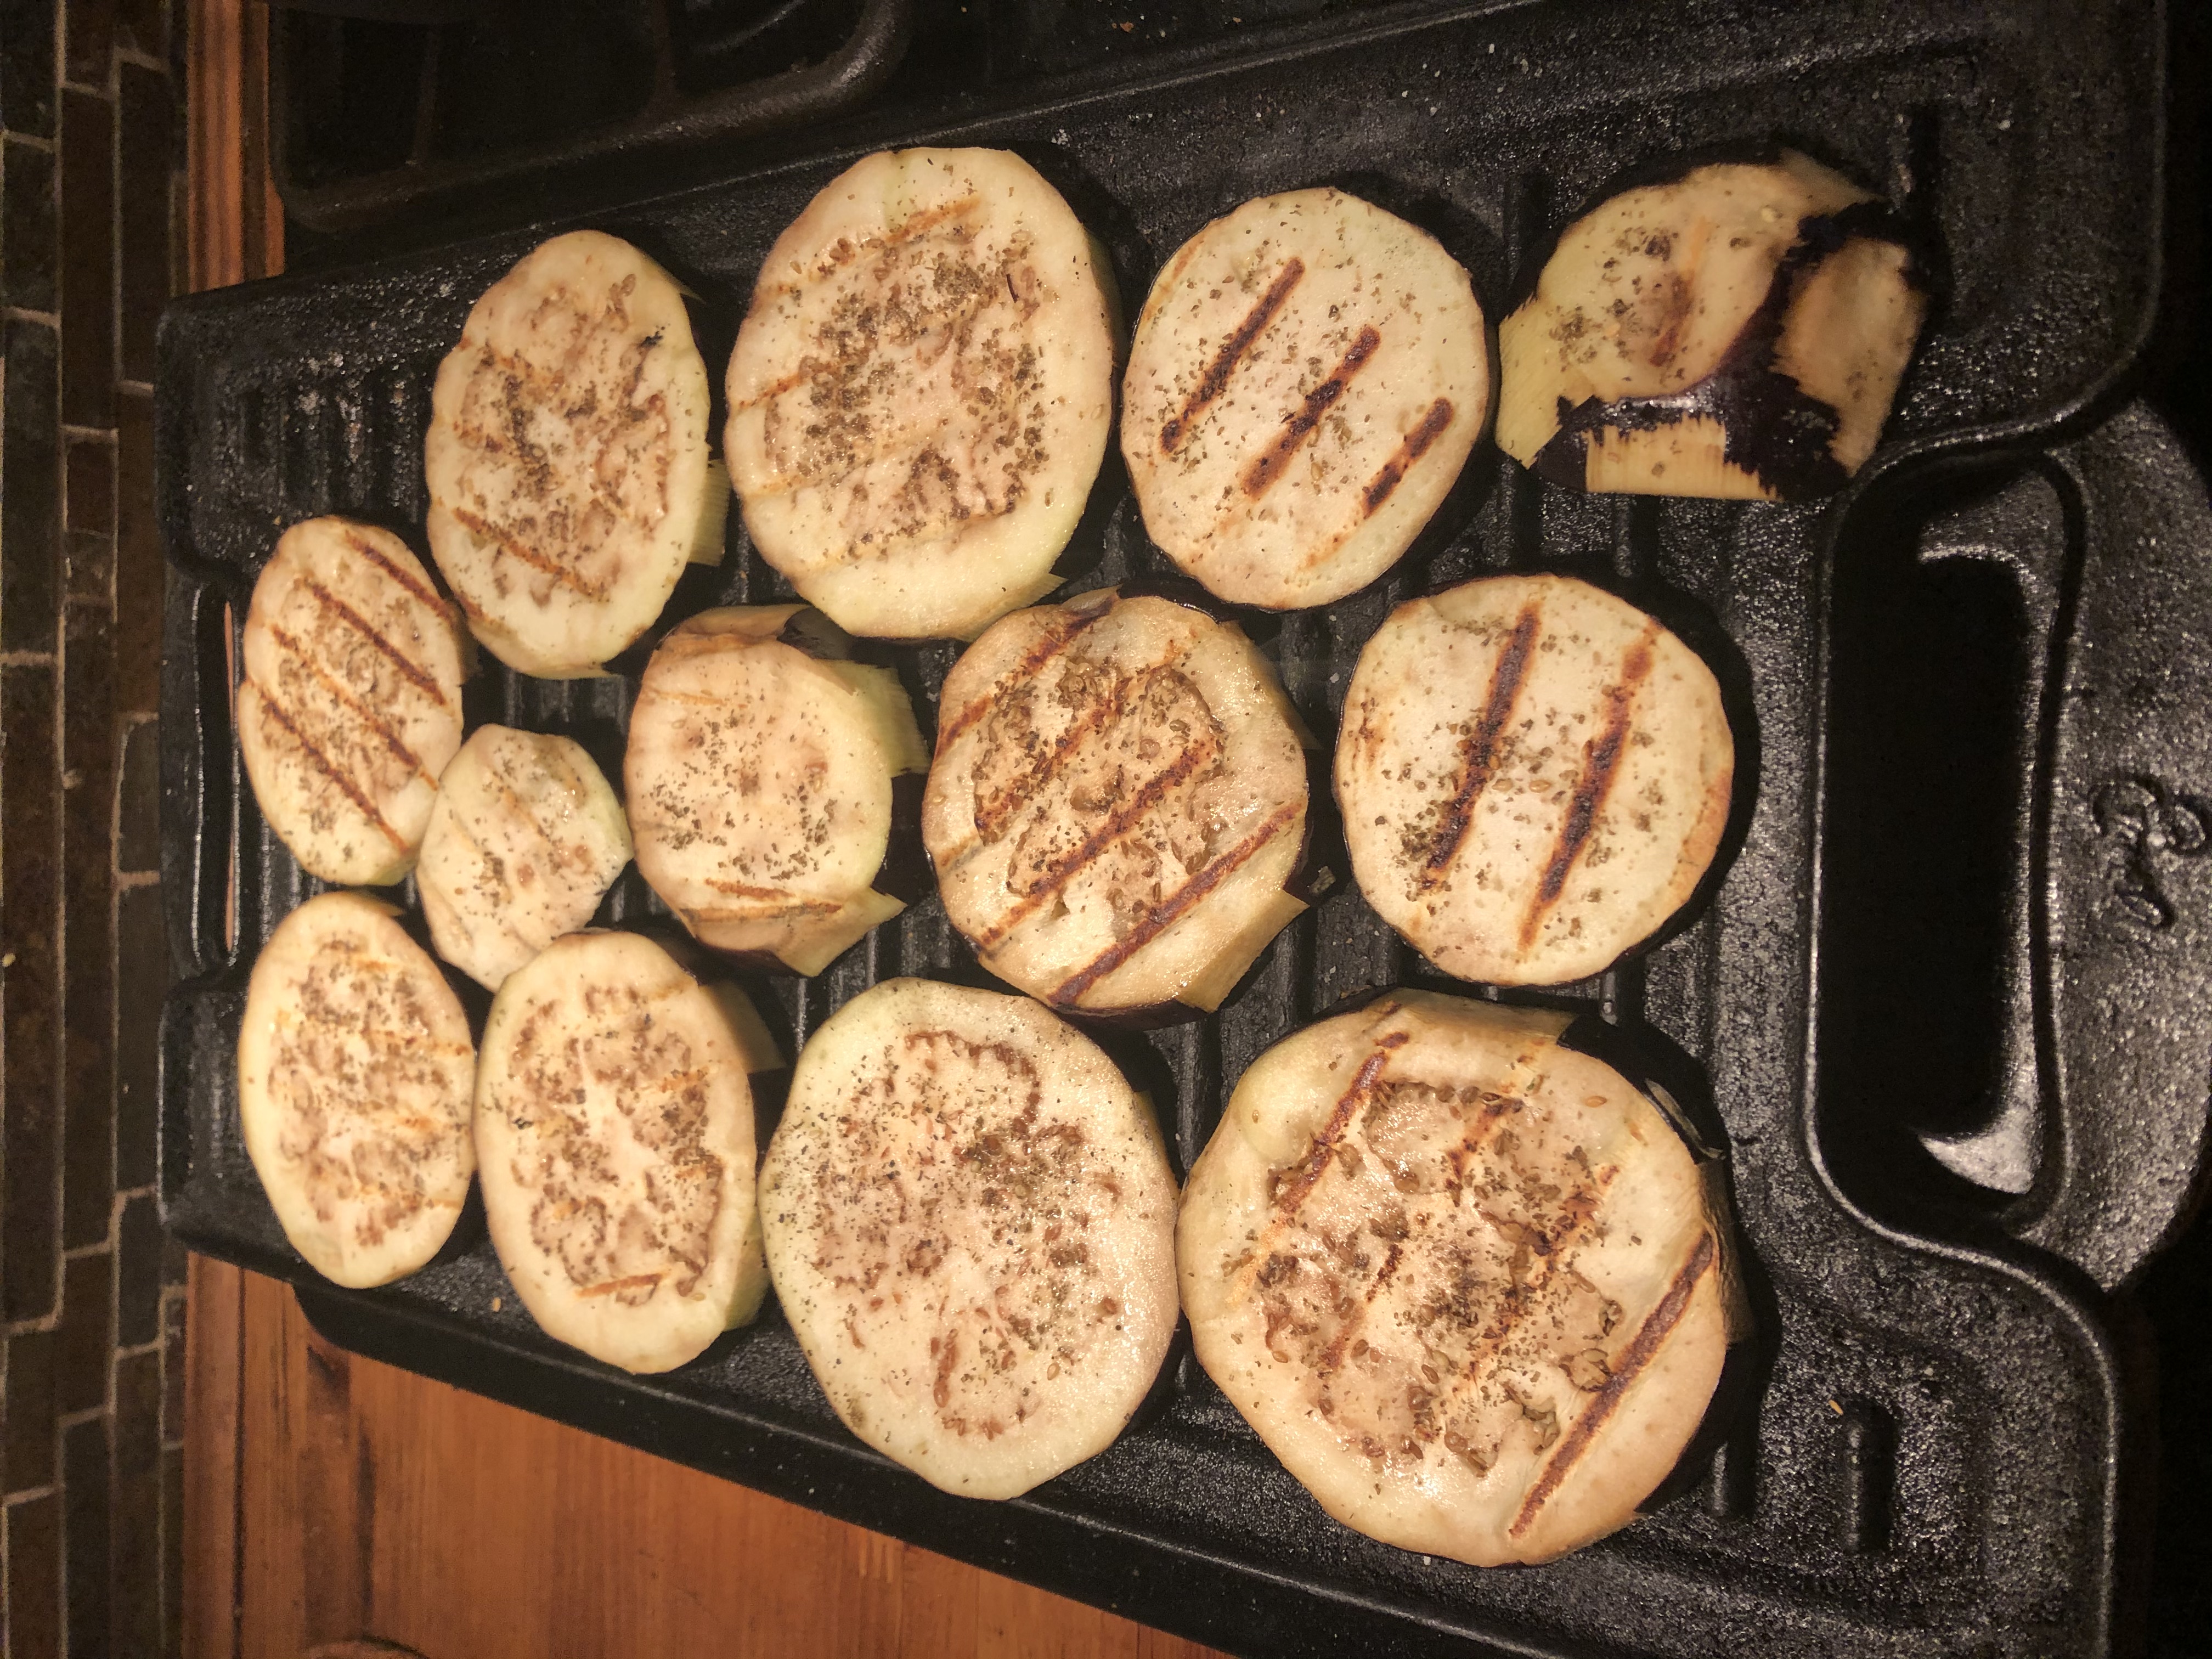 Eggplant cooking on indoor grill